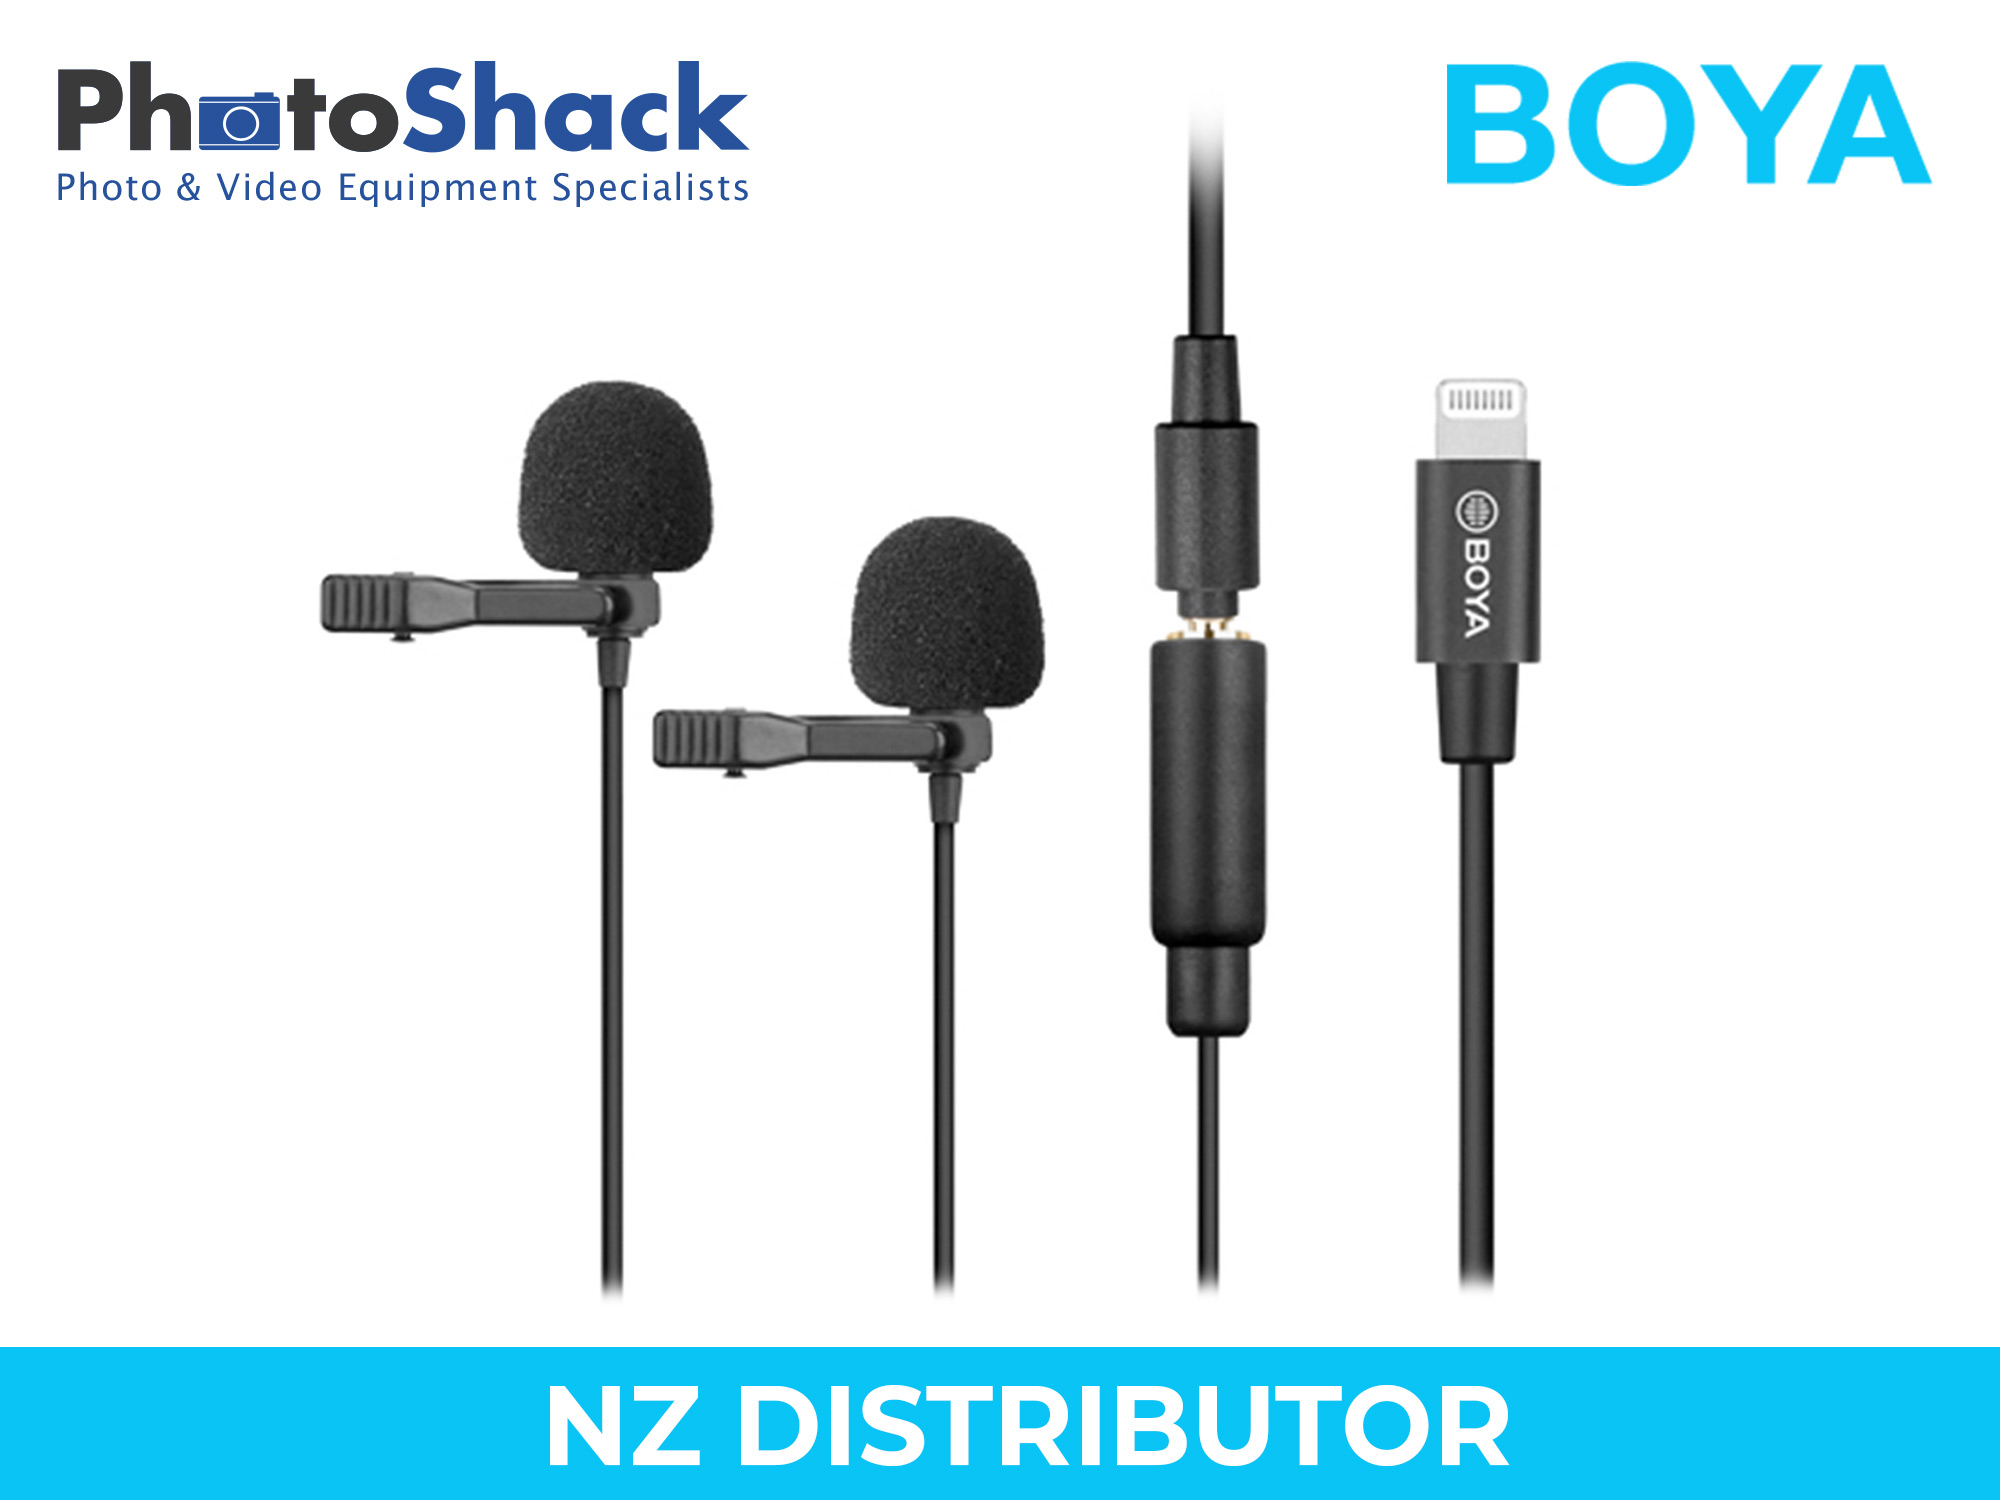 Boya BY-M2D Digital Dual Lavalier Microphones for iOS devices